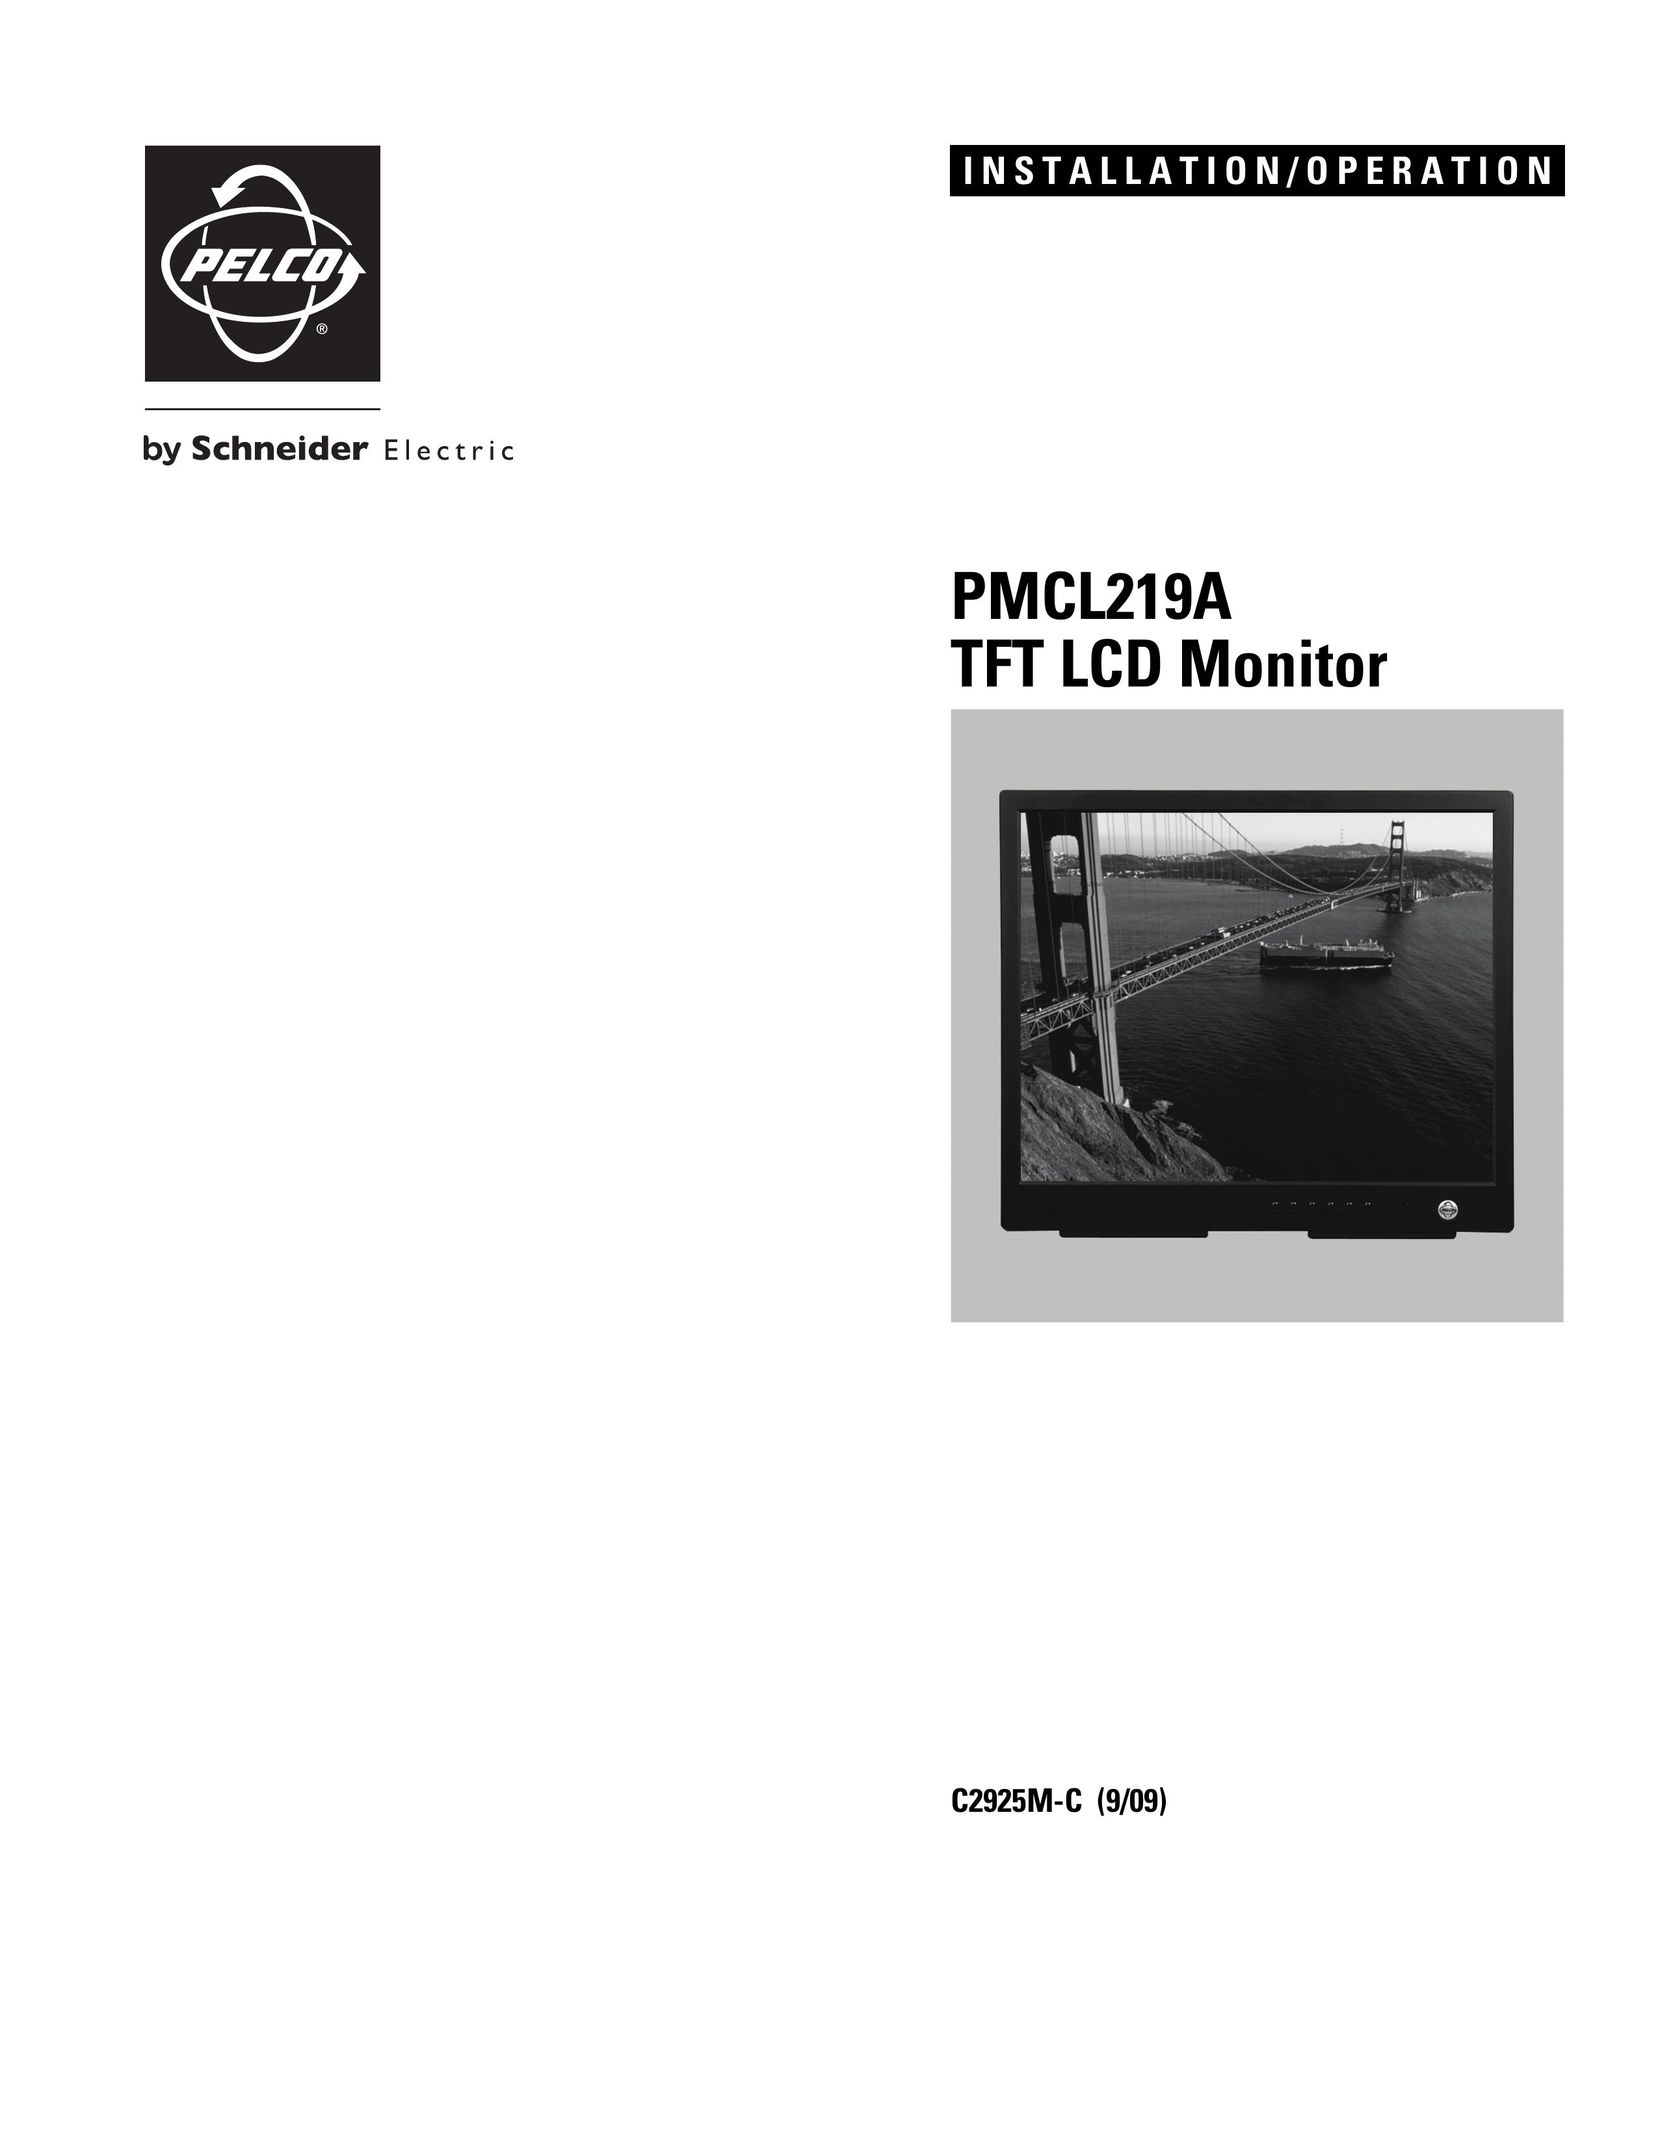 Pelco PMCL219A Car Video System User Manual